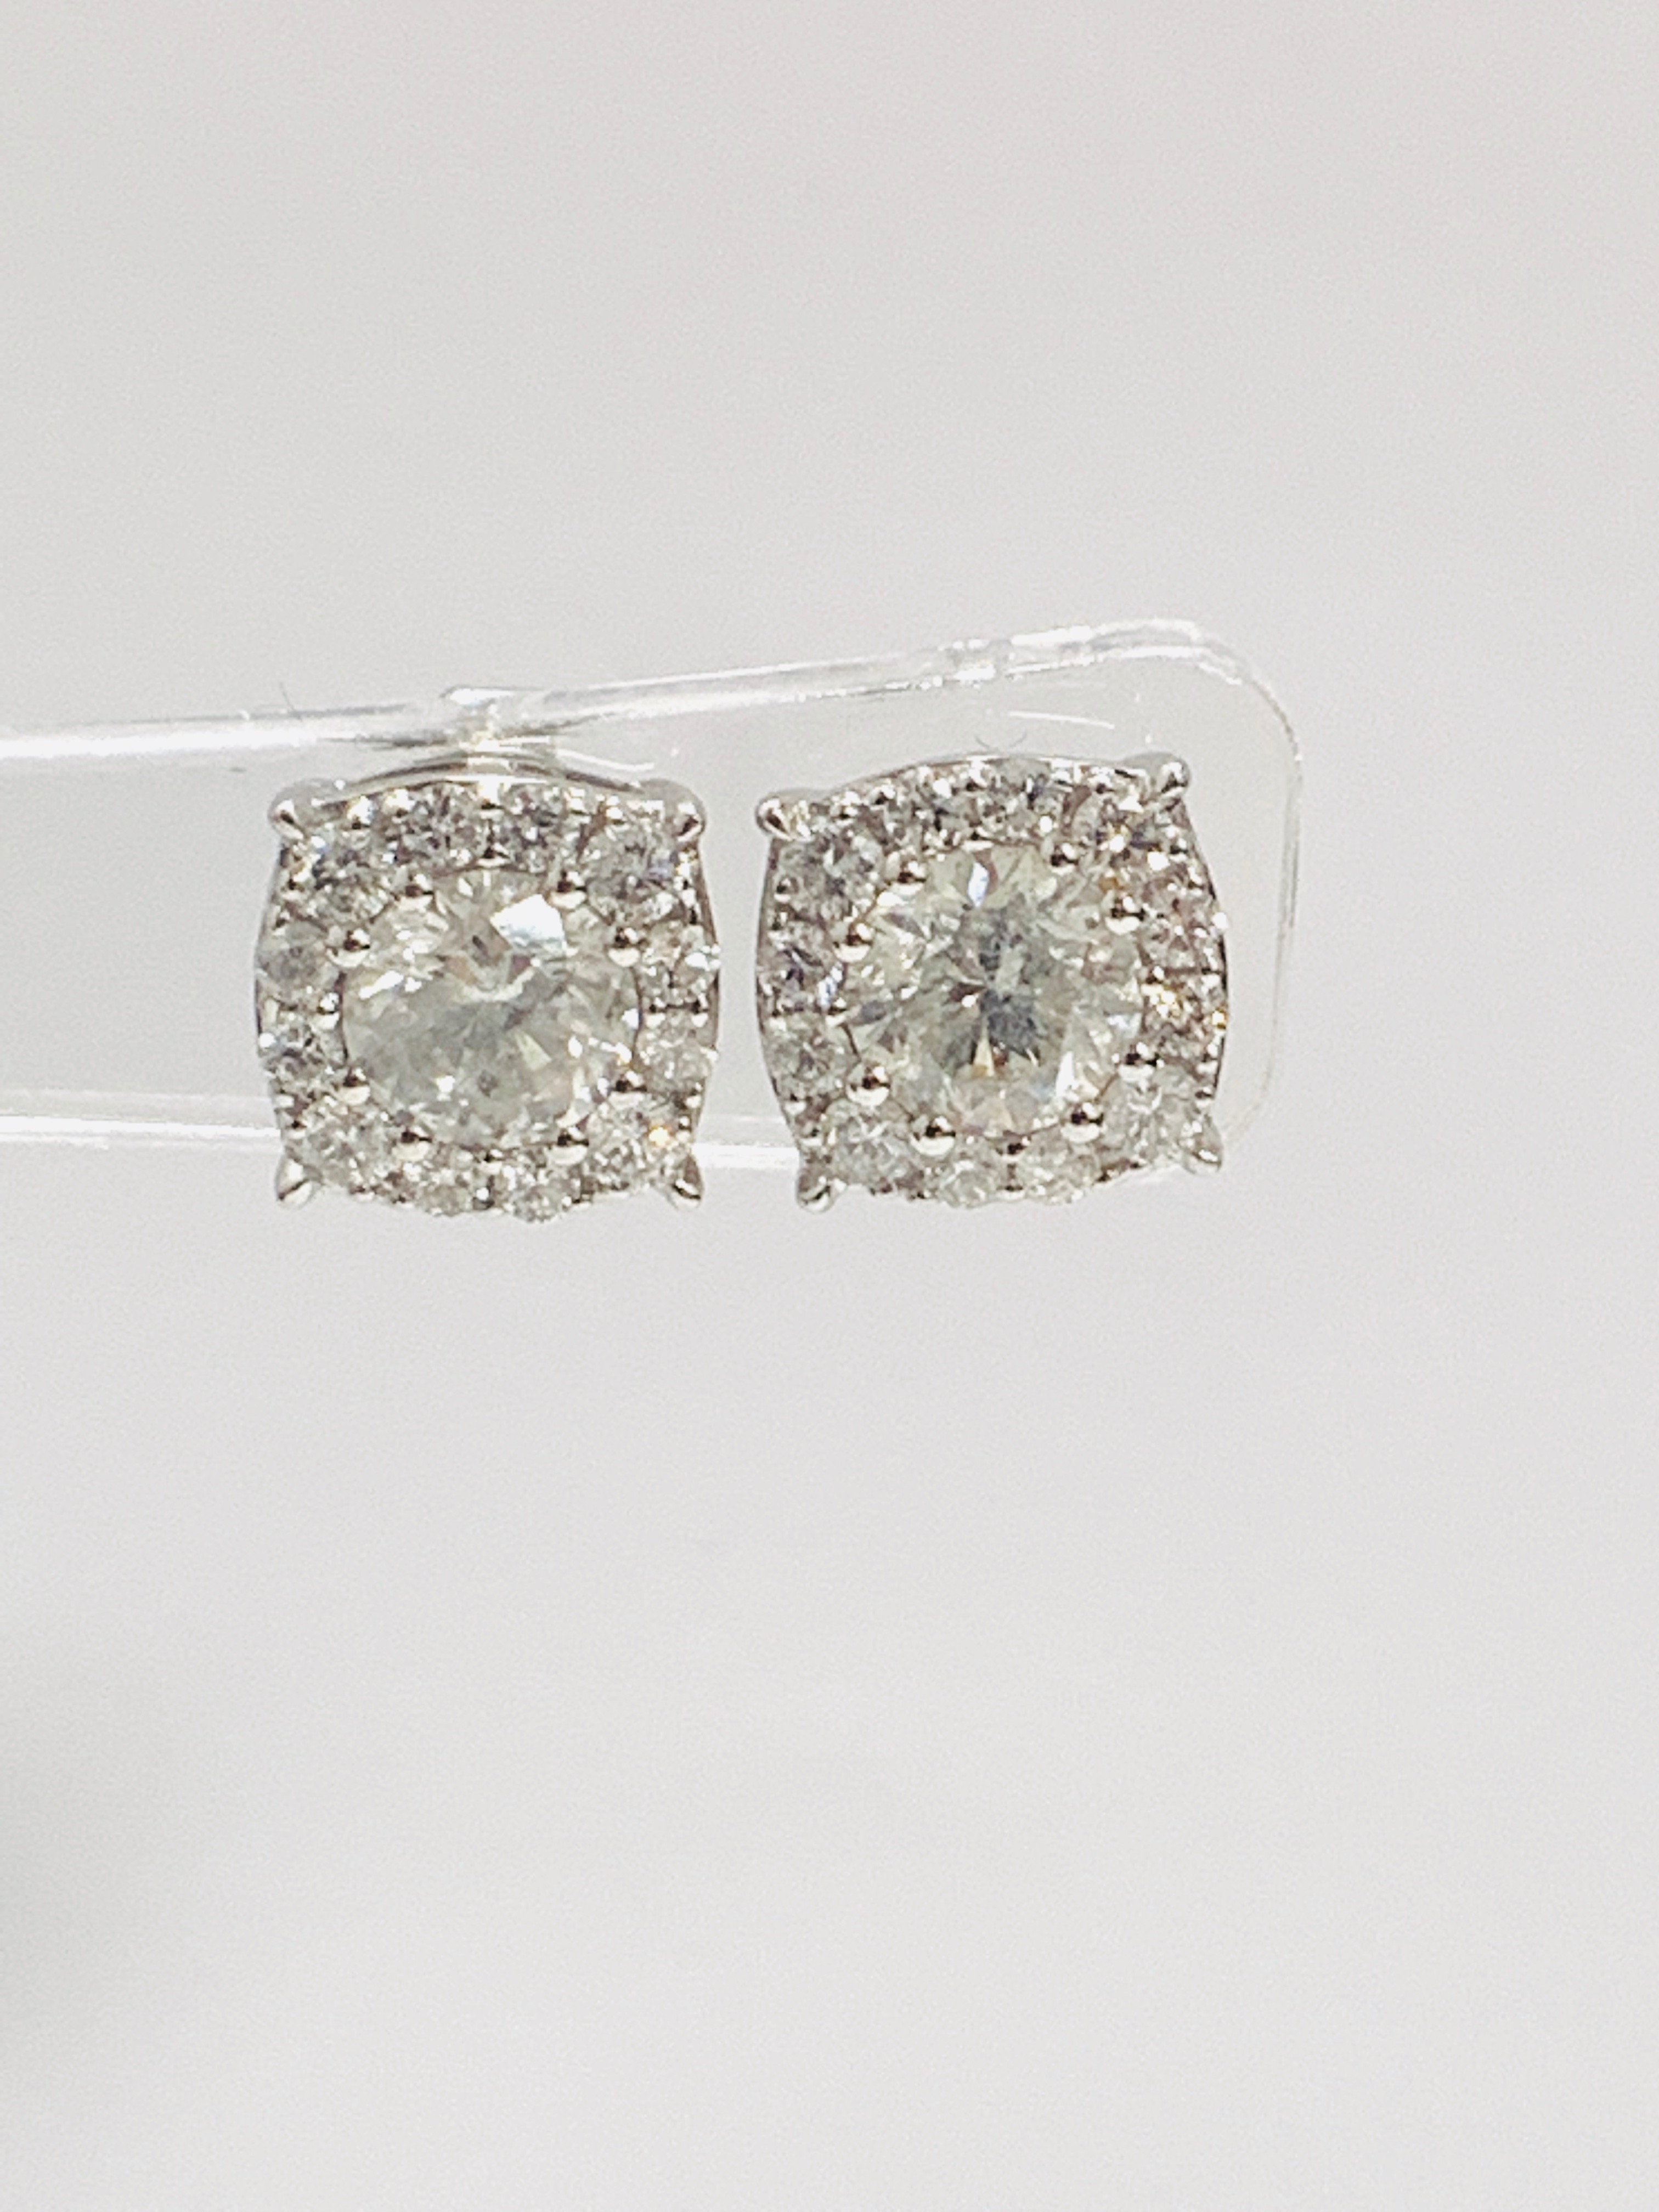 18ct White Gold Diamond earrings featuring centre, 2 round brilliant cut Diamonds (1.39ct) - Image 9 of 11